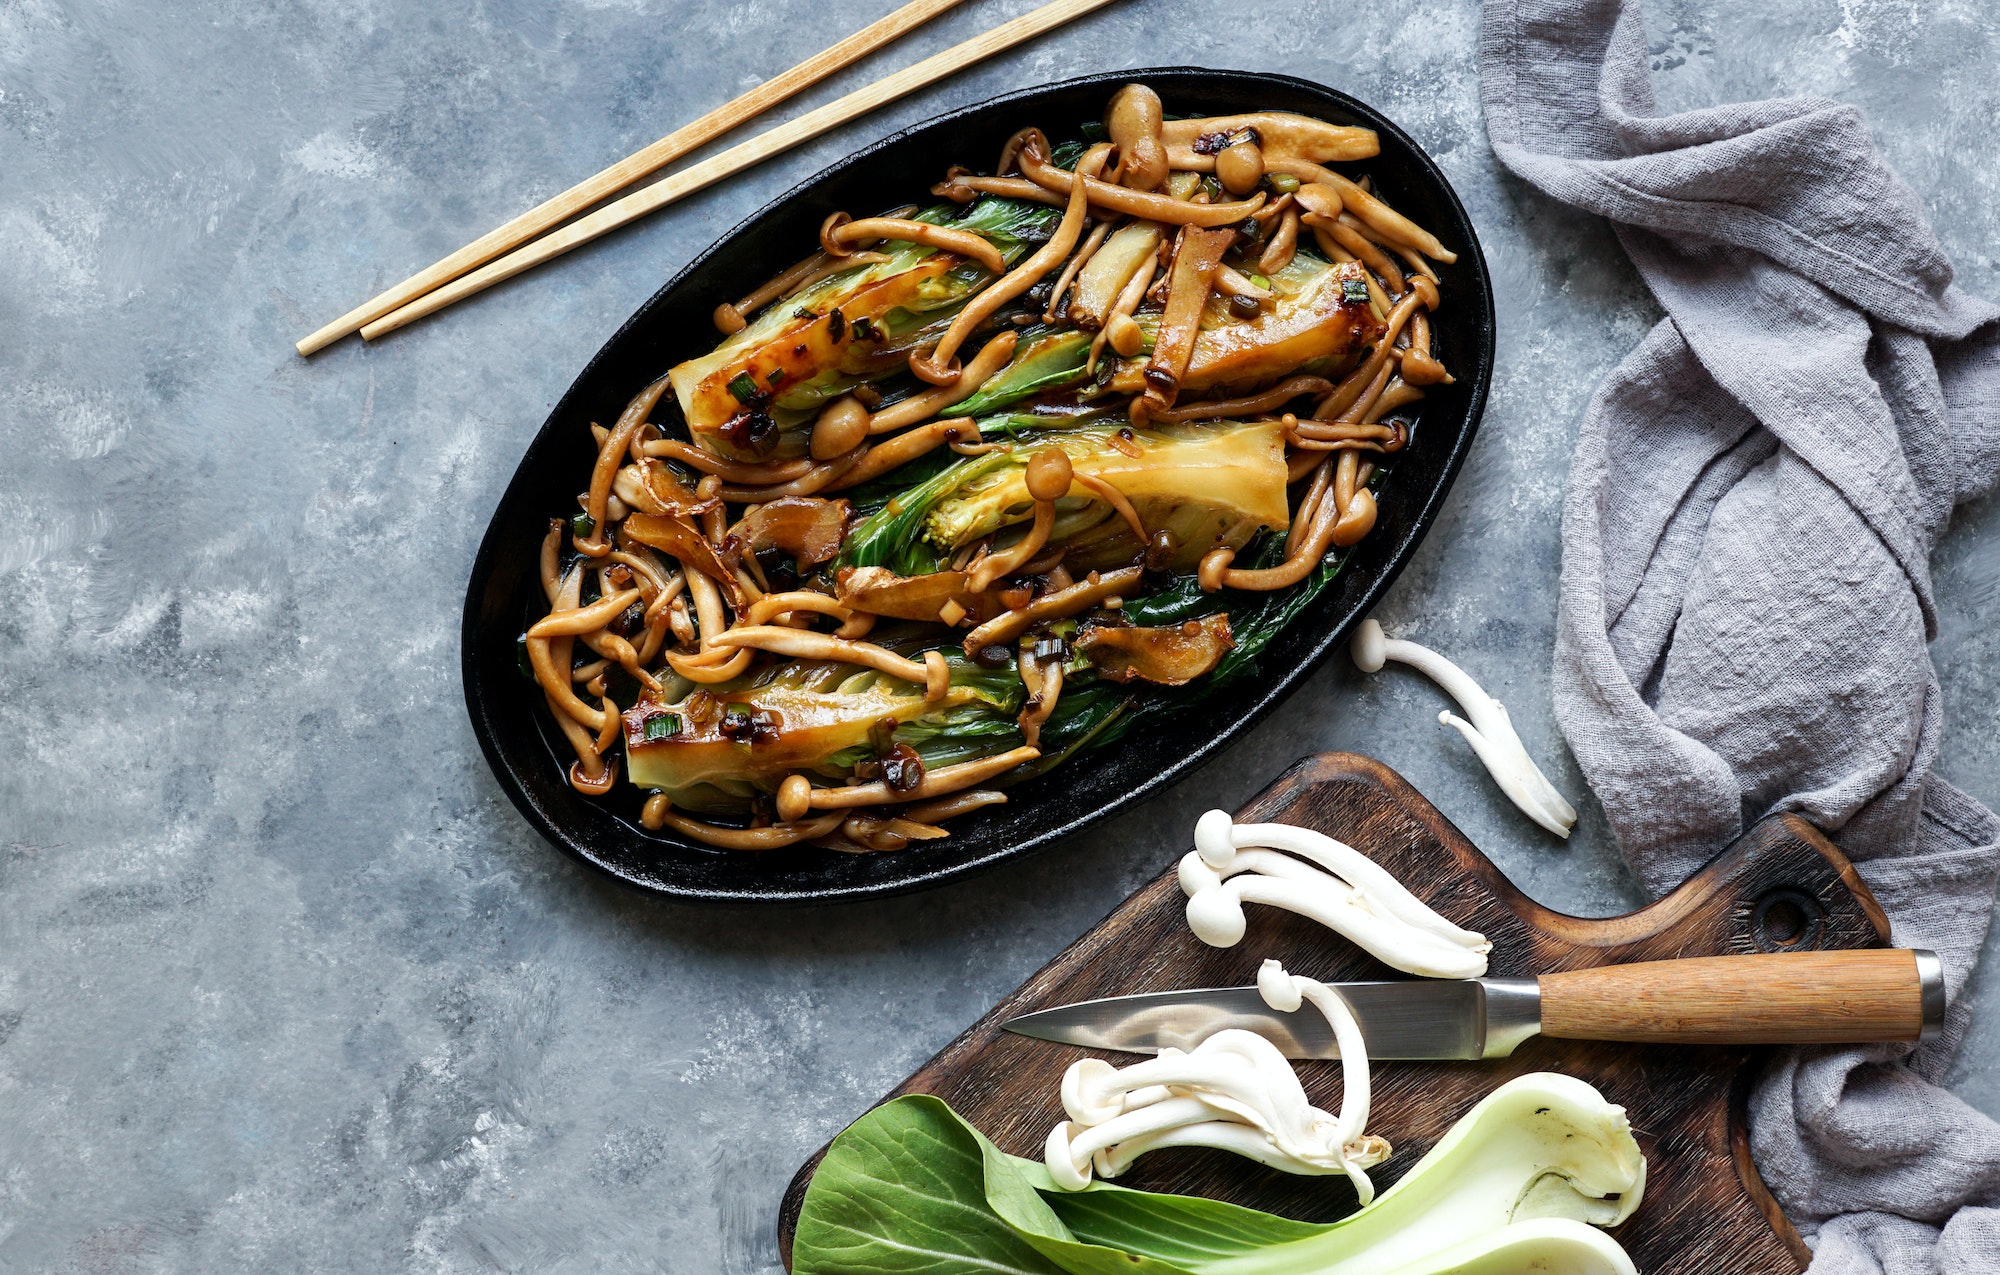 Bok choy o pak choi cabbage with shimeji mushrooms and Oyster sauce